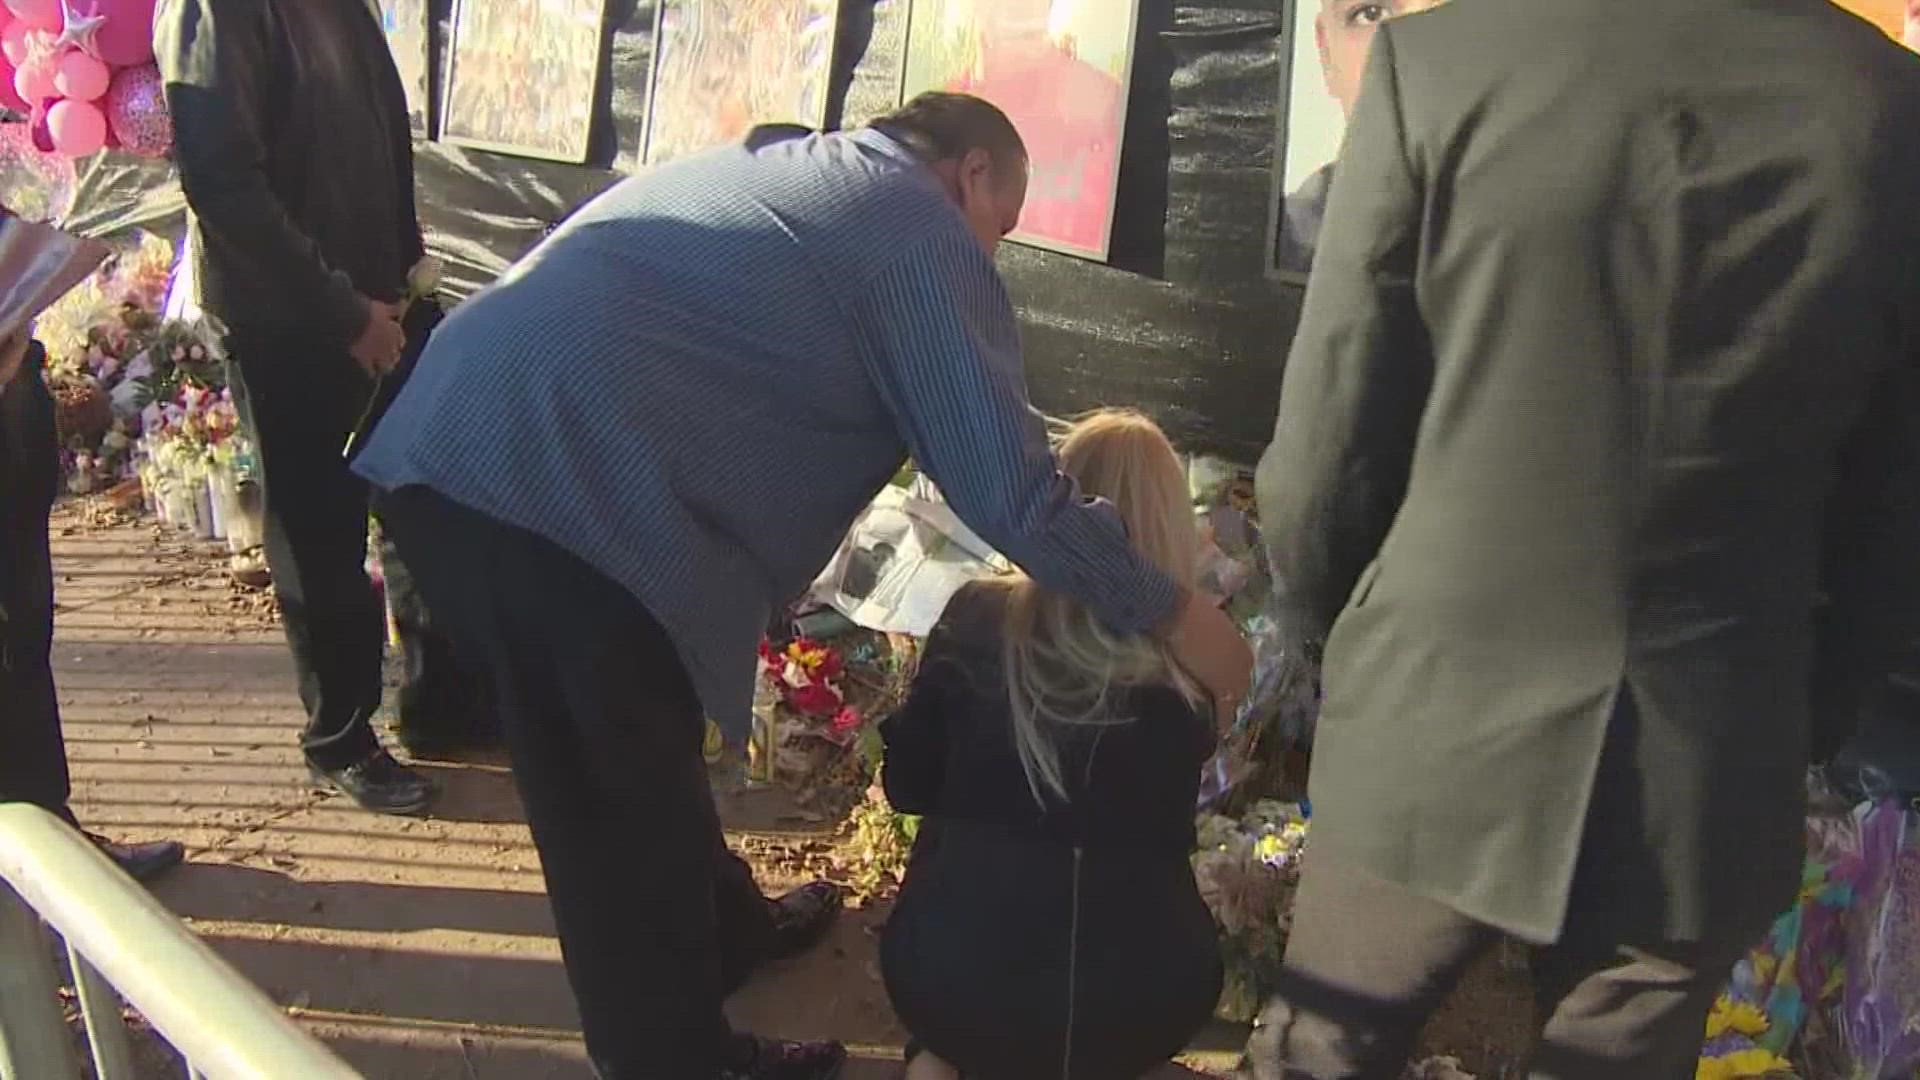 The family of Rudy Peña, the 23-year-old Astroworld Festival victim, visited NRG Park this afternoon and laid flowers under Rudy's picture hanging outside the gate.